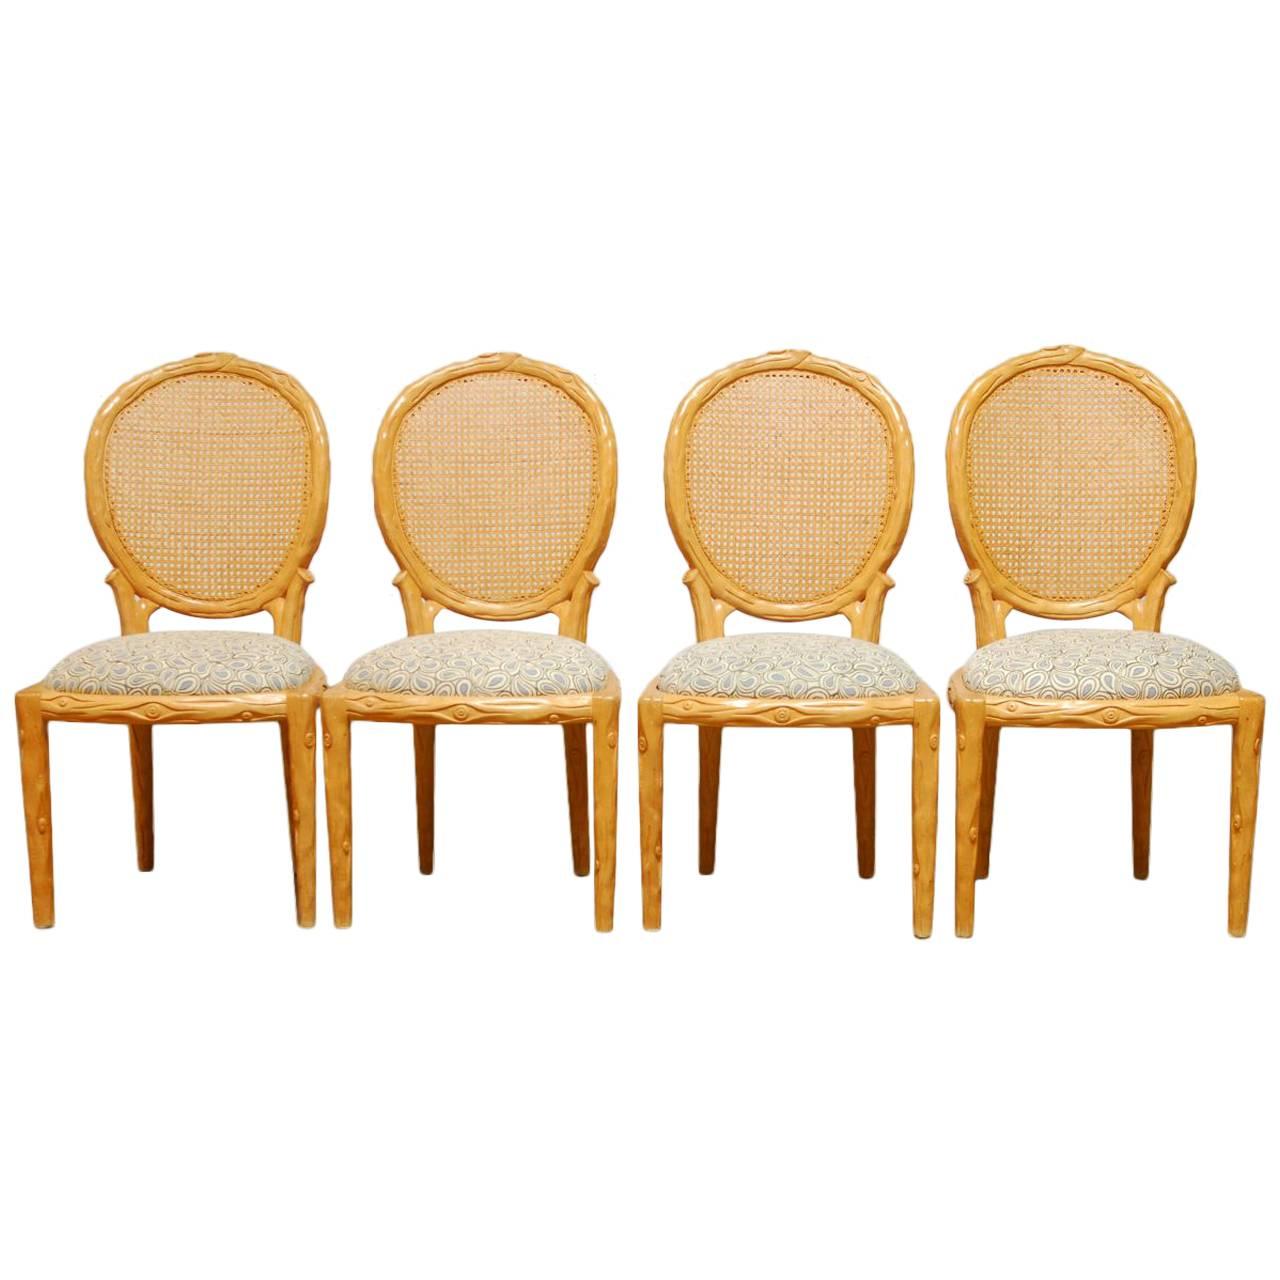 Set of Four Italian Faux Bois Dining Chairs